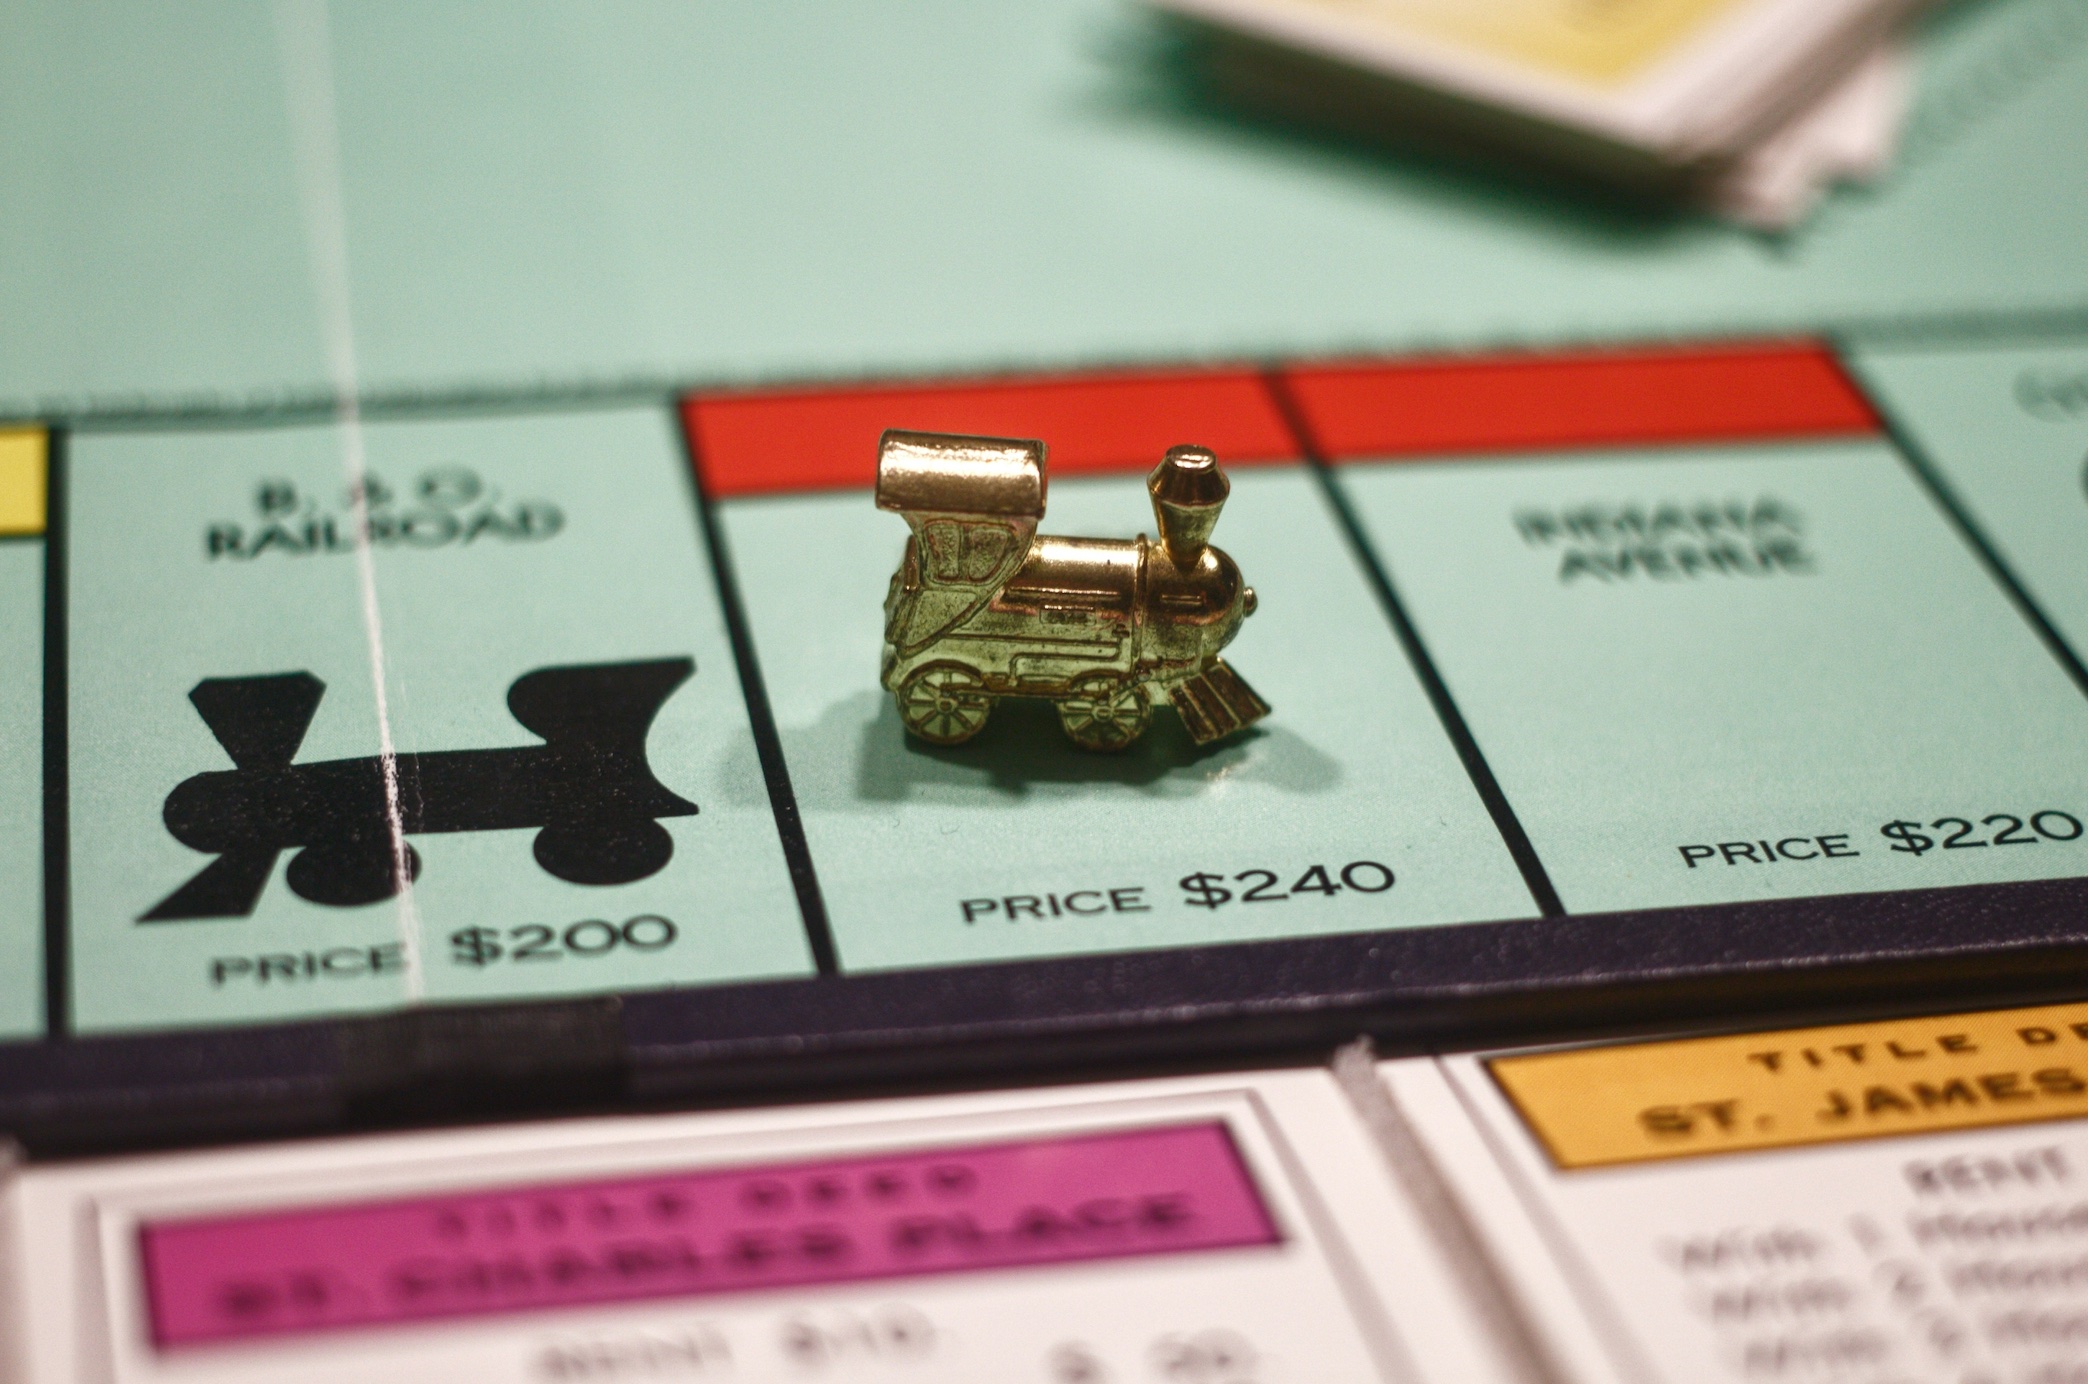 Close-up of Monopoly board game with train piece; image by Joshua Hoehne, via Unsplash.com.